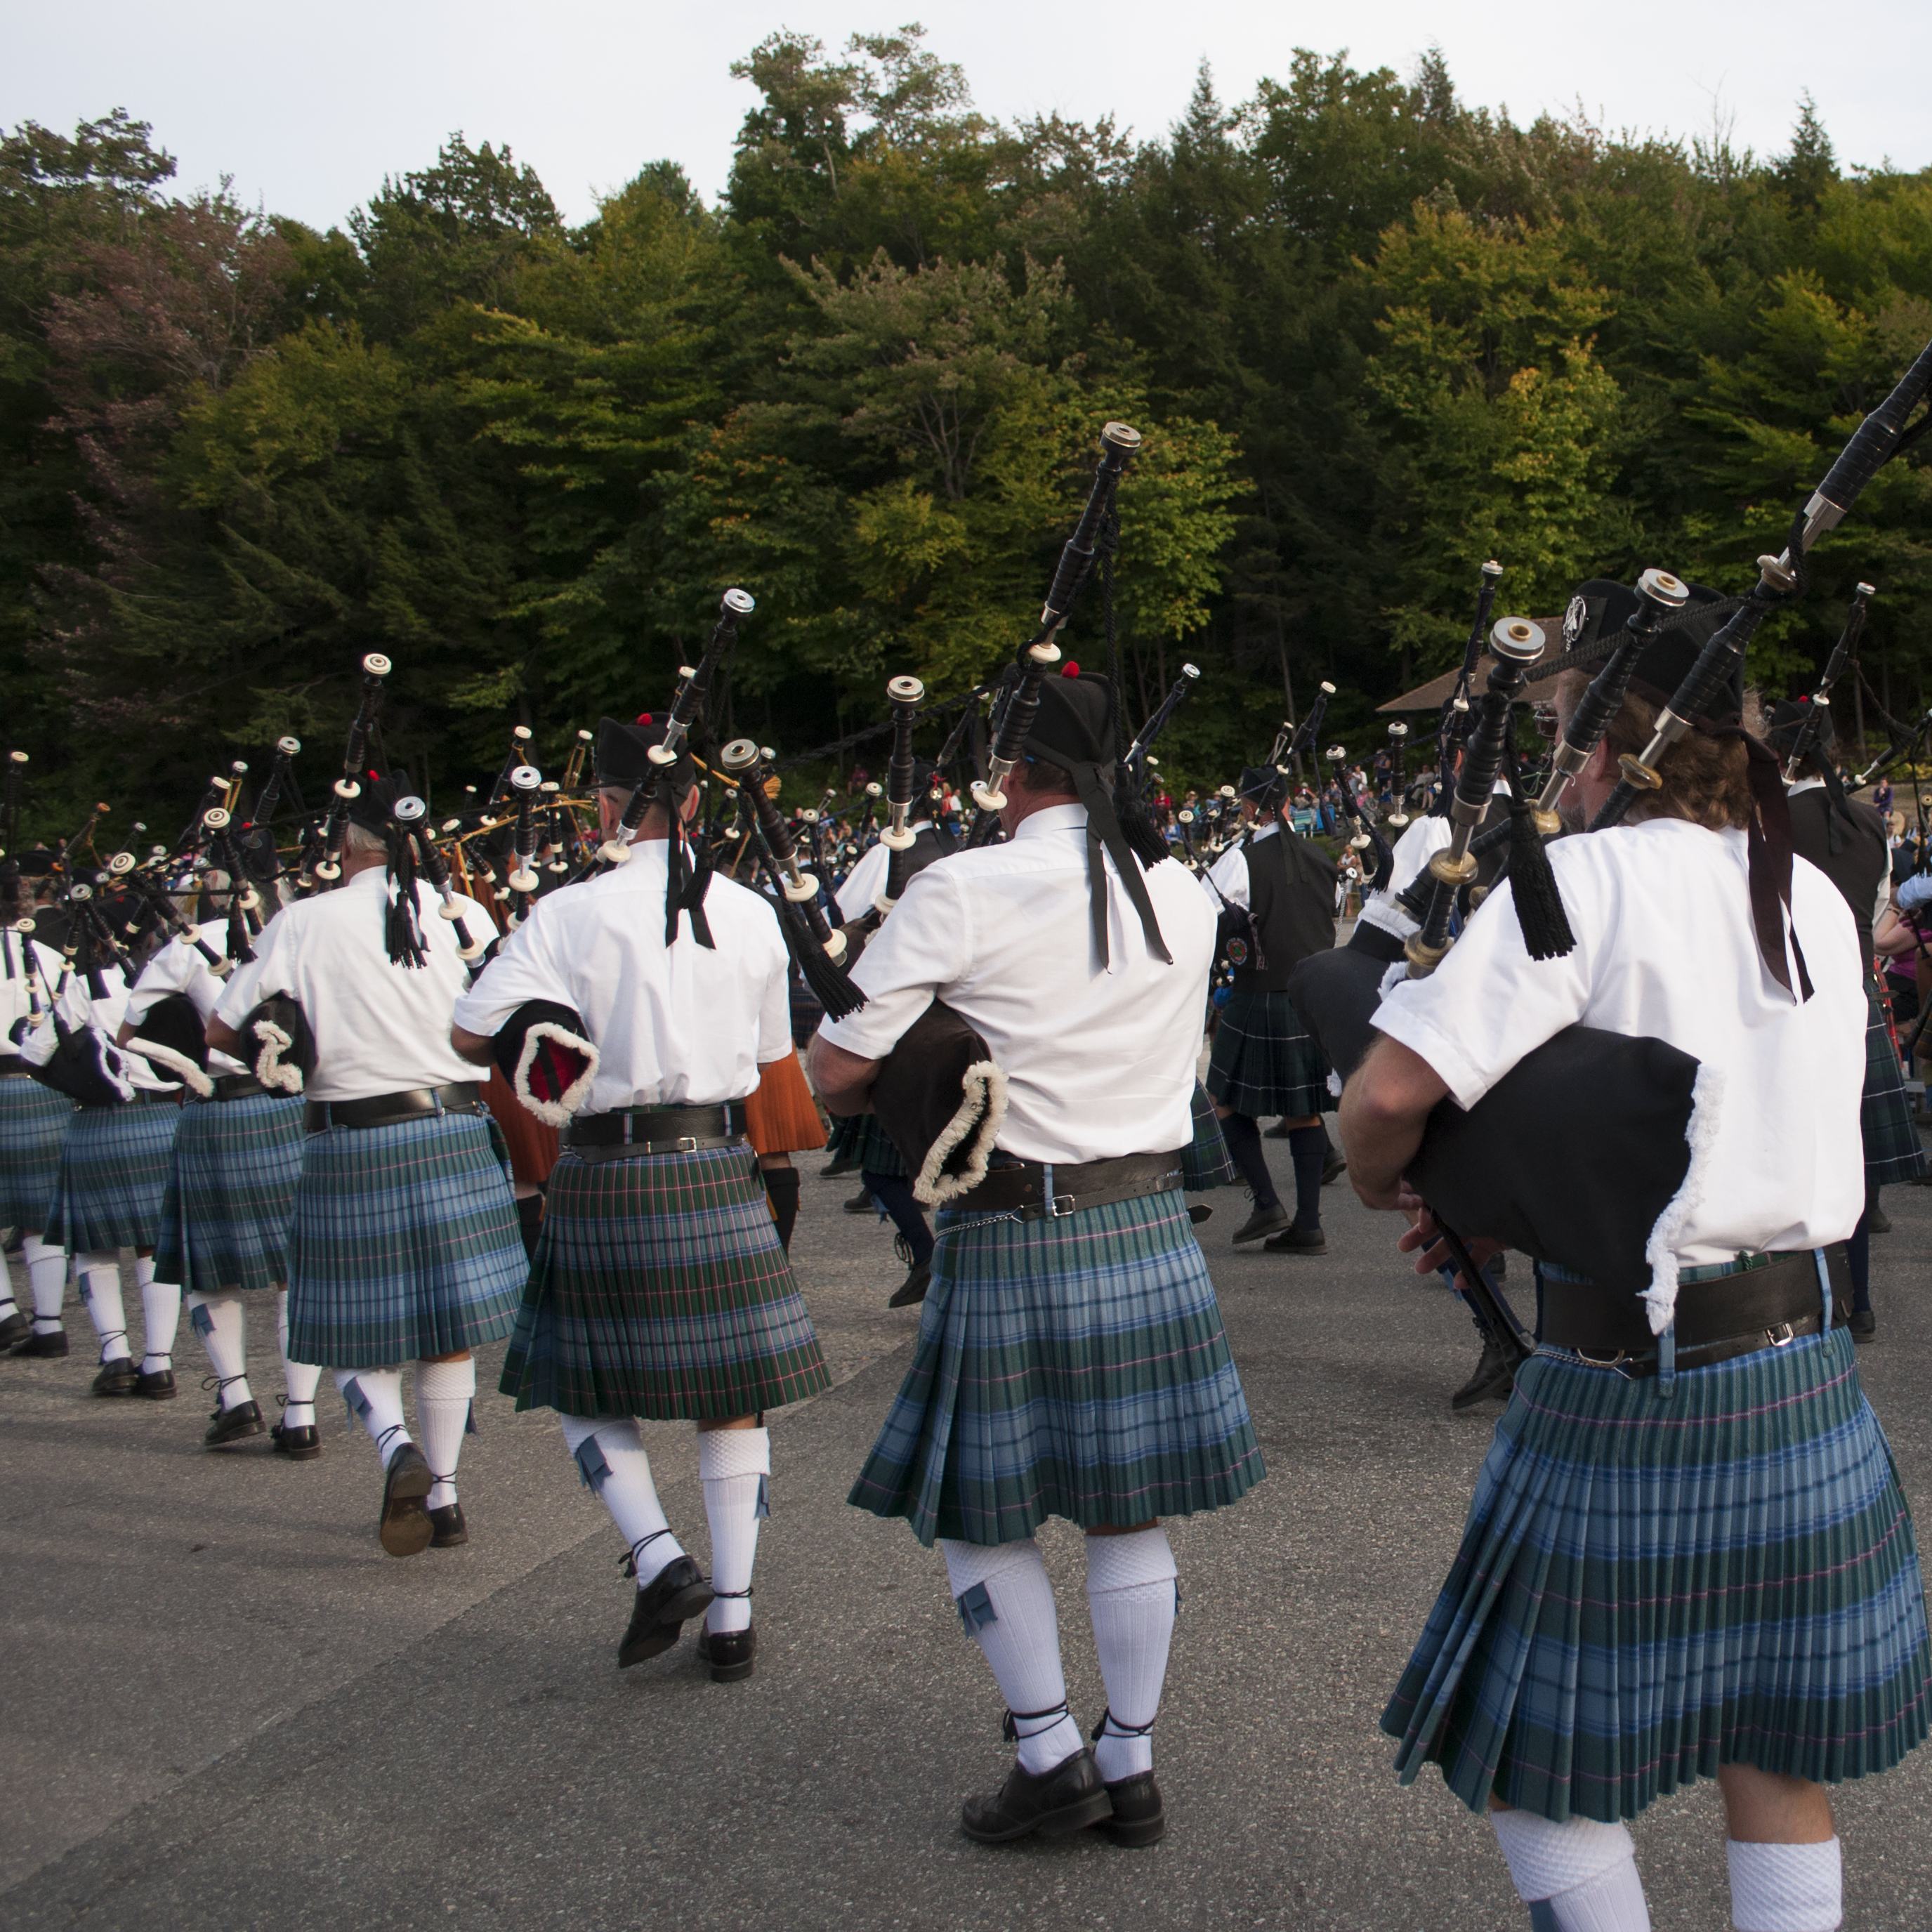 hundreds of scottish bagpipers marching in unison at highland games